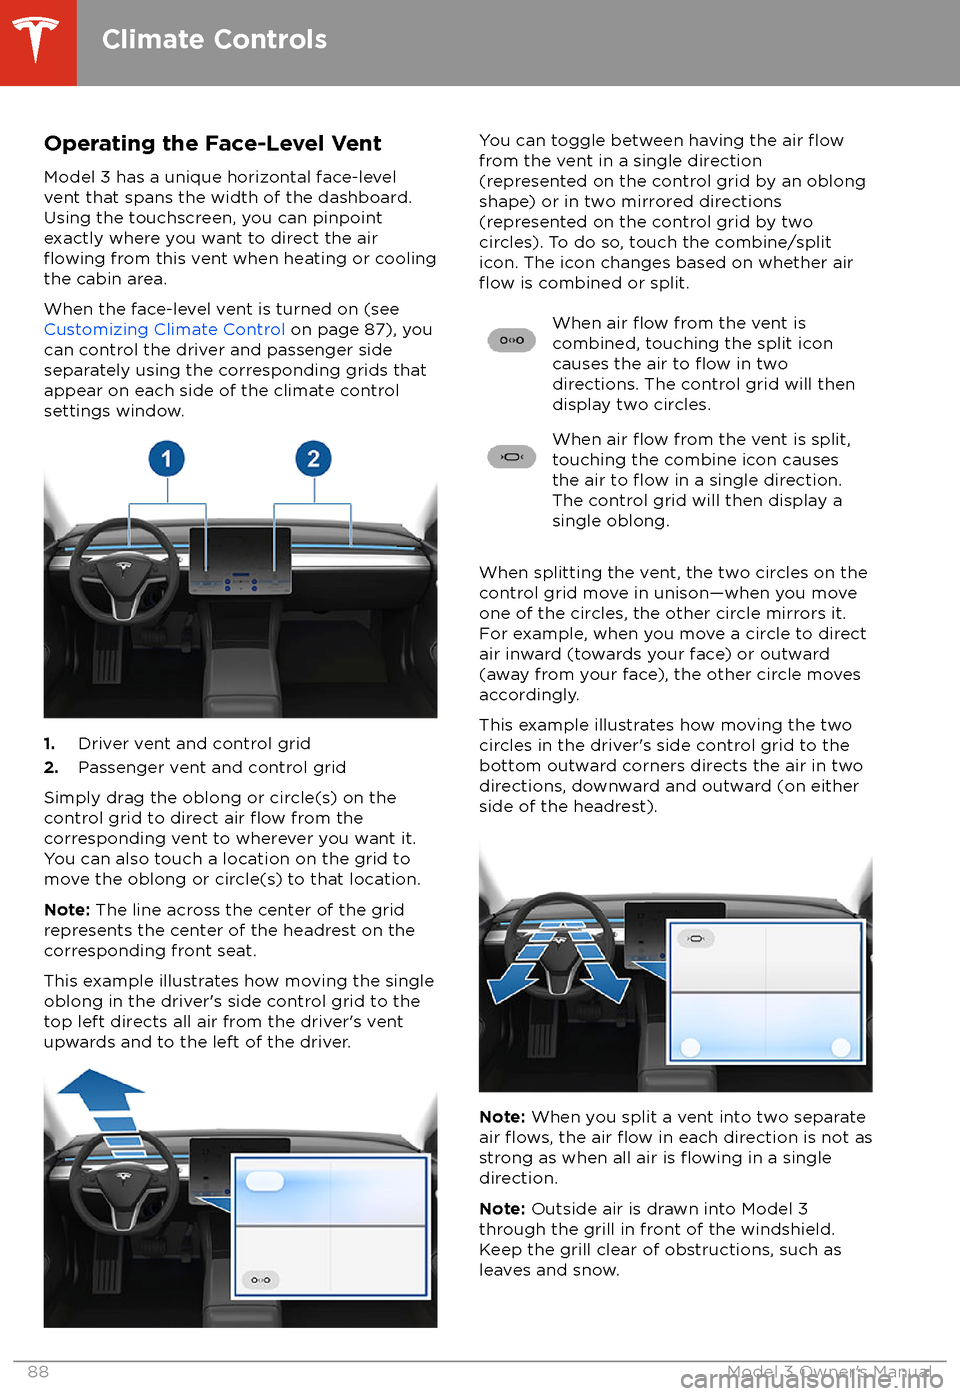 TESLA MODEL 3 2018 Manual Online Operating the Face-Level Vent
Model 3 has a unique horizontal face-level
vent that spans the width of the dashboard.
Using the touchscreen, you can pinpoint
exactly where you want to direct the air
fl